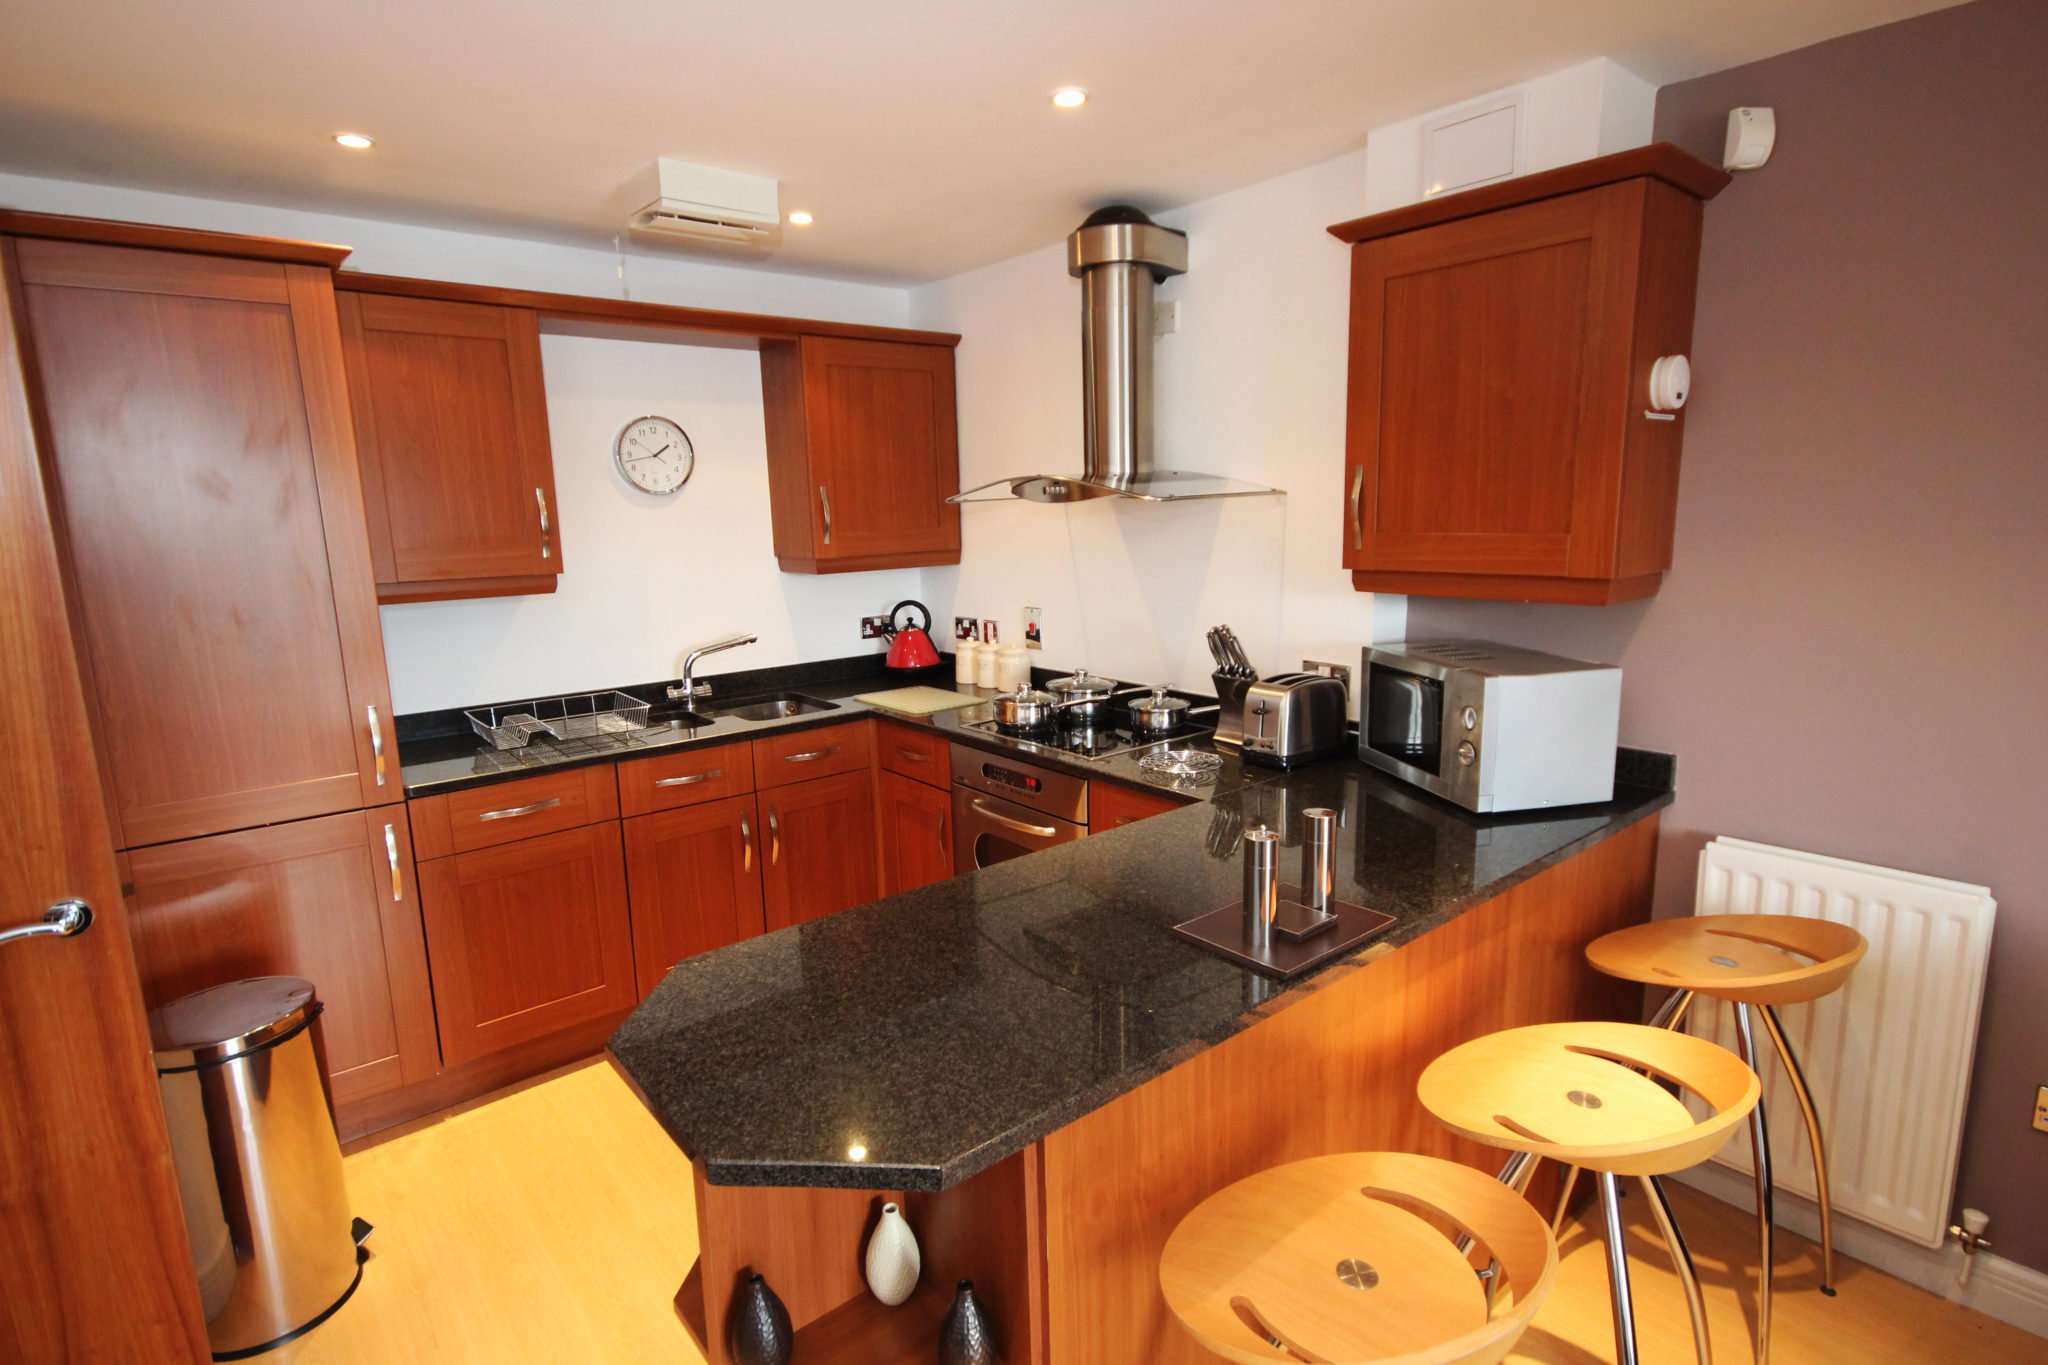 Short-Let-Apartments-Newcastle-UK-available-Now!-Book-Serviced-Accommodation-in-North-England-today-at-cheaper-than-a-Hotel!-Parking,-Wifi,-All-bills-incl!-Urban-Stay